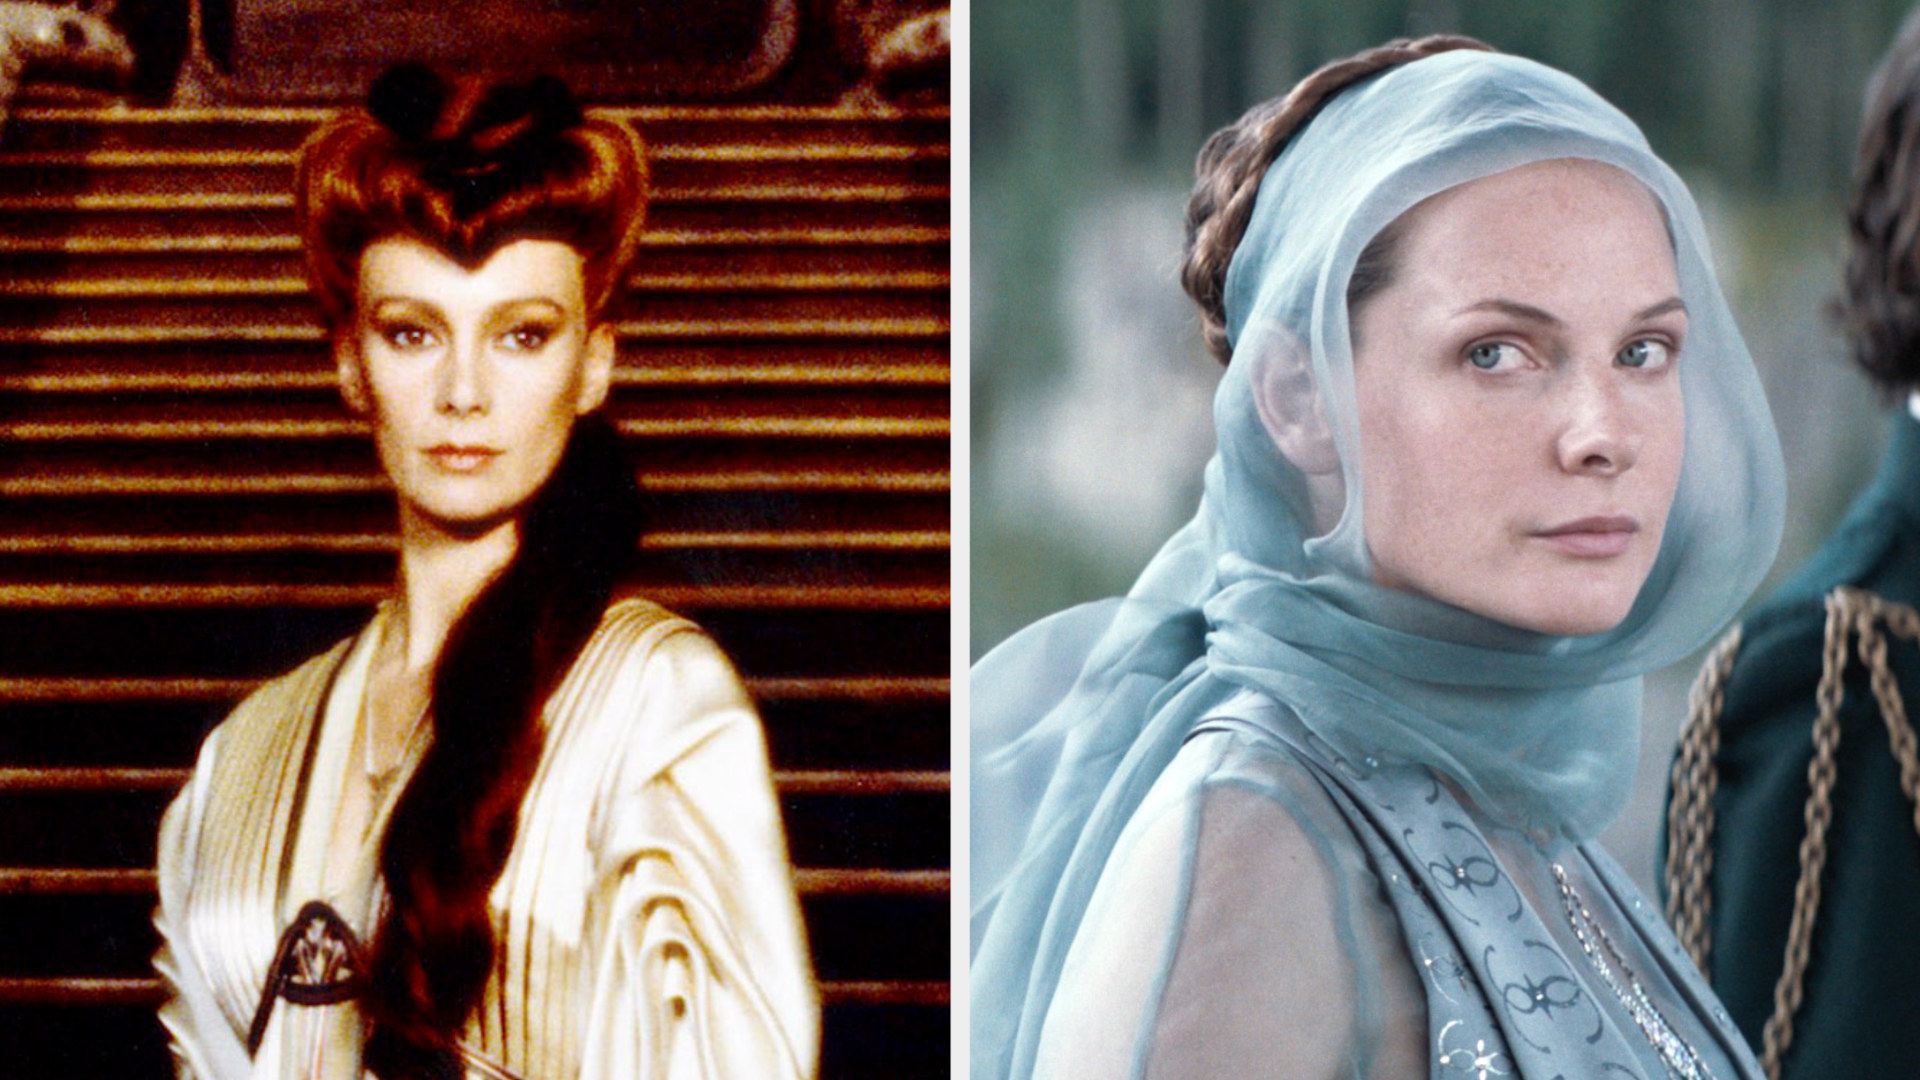 Francesca Annis as Lady Jessica with a long, red braid and Rebecca Ferguson as Lady Jessica with a blue head scarf over her braided bun